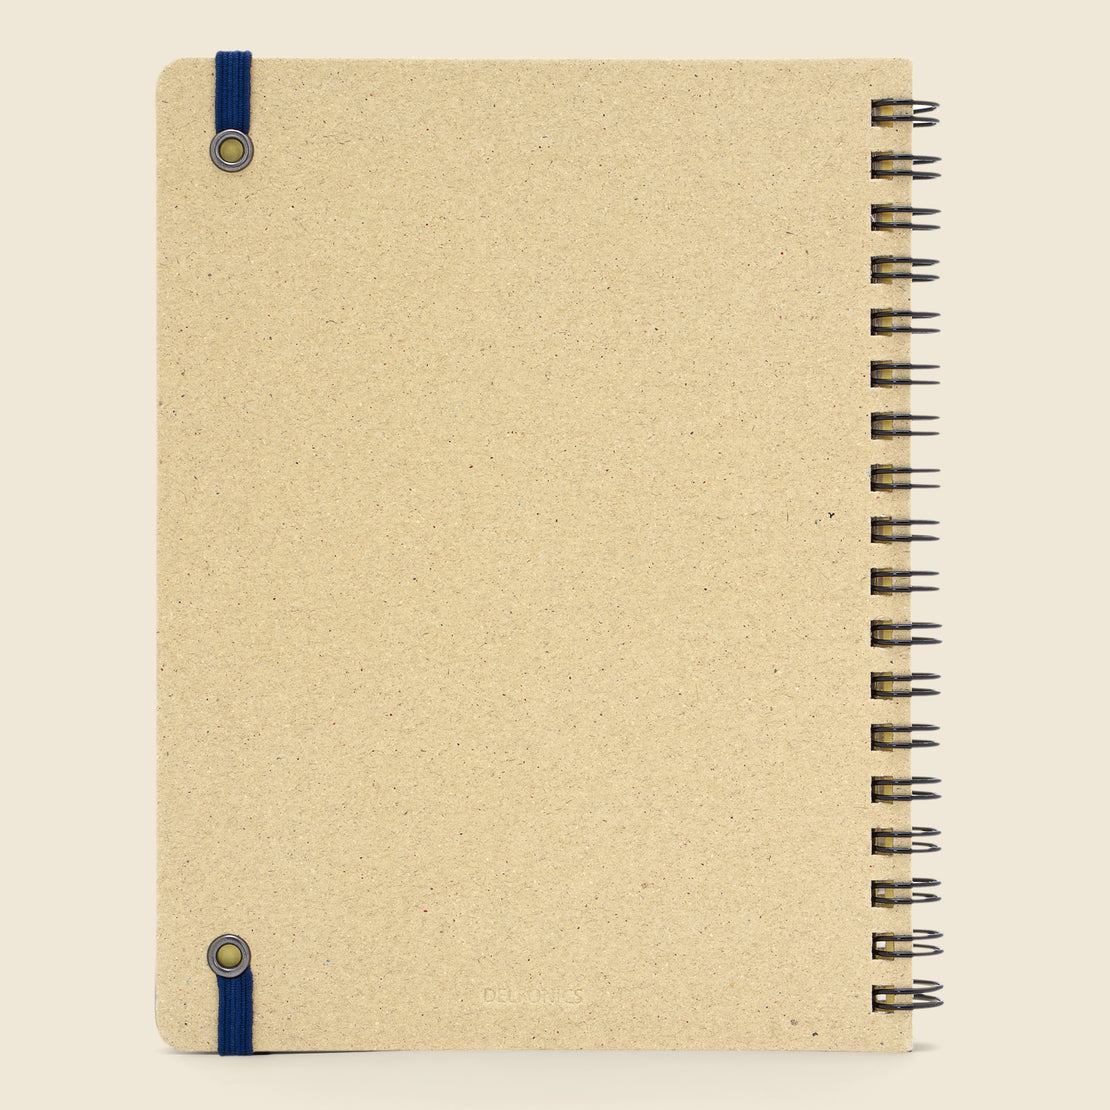 Rollbahn Spiral Notebook - Dark Blue - Paper Goods - STAG Provisions - Home - Office - Paper Goods